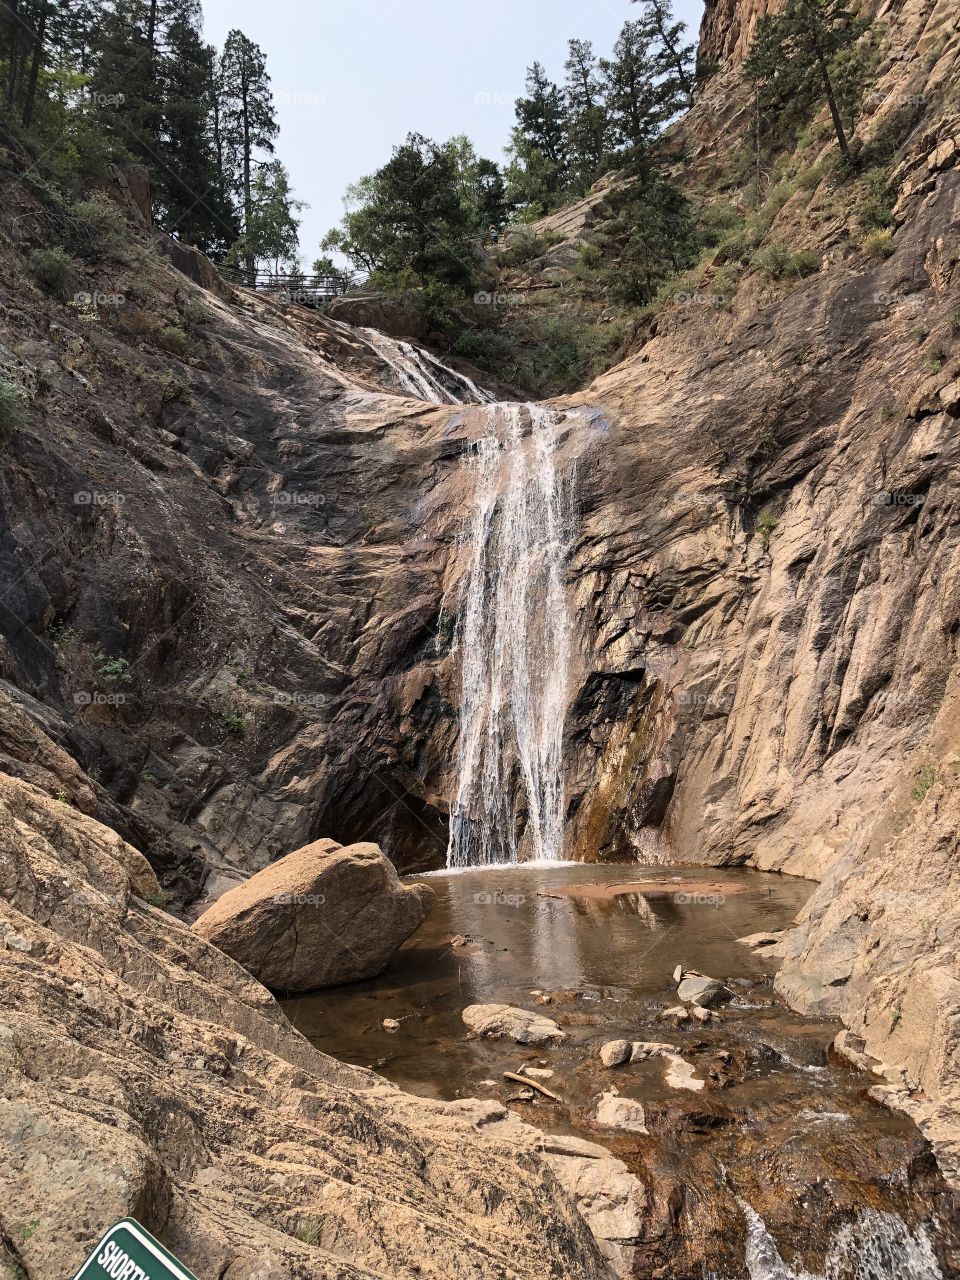 Great beauty in water falls. Midway through the 200 stair climb this is the view of Seven Falls in Colorado Springs. @Robinlin